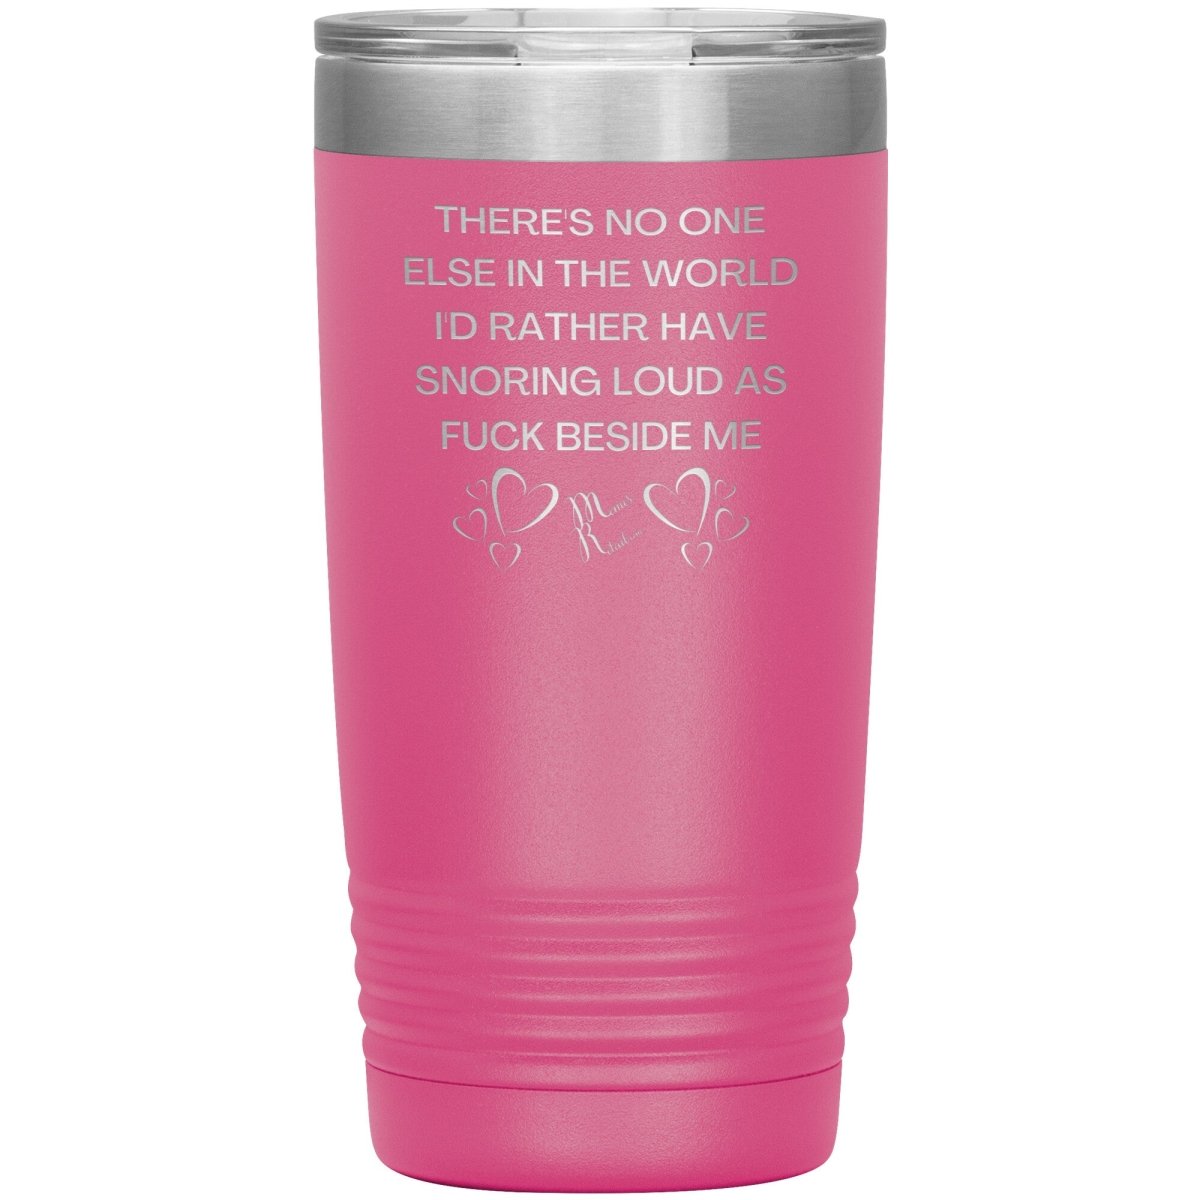 There's No One Else in the World I'd Rather Have Snoring Loud, 20oz Insulated Tumbler / Pink - MemesRetail.com